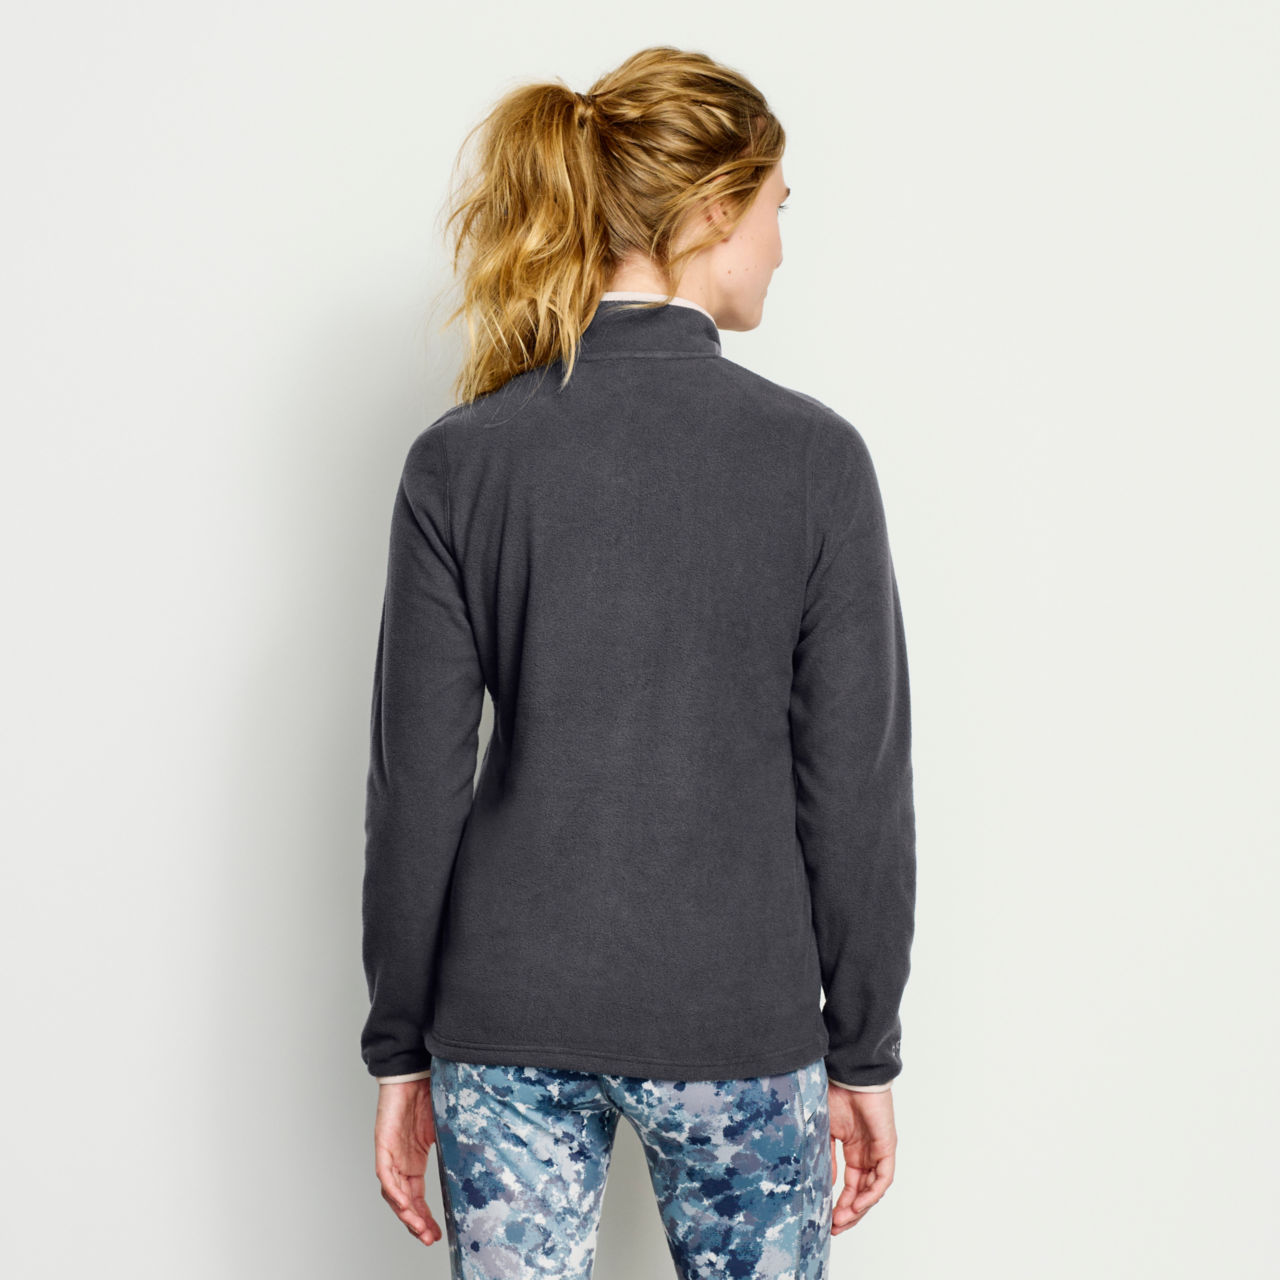 Women’s Hill Country Microfleece Quarter-Snap - CARBON image number 3